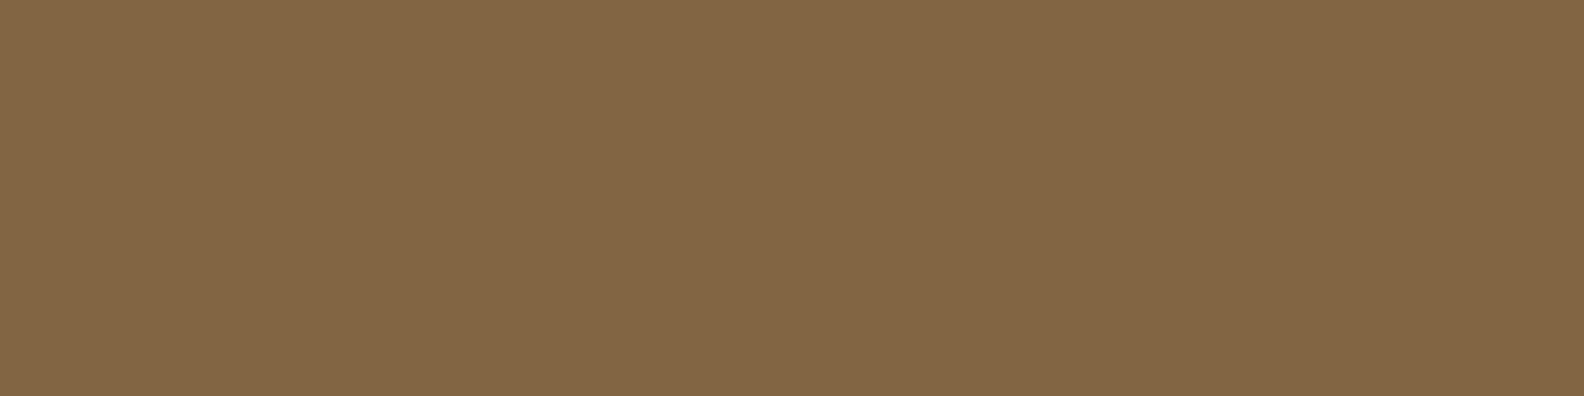 1584x396 Raw Umber Solid Color Background